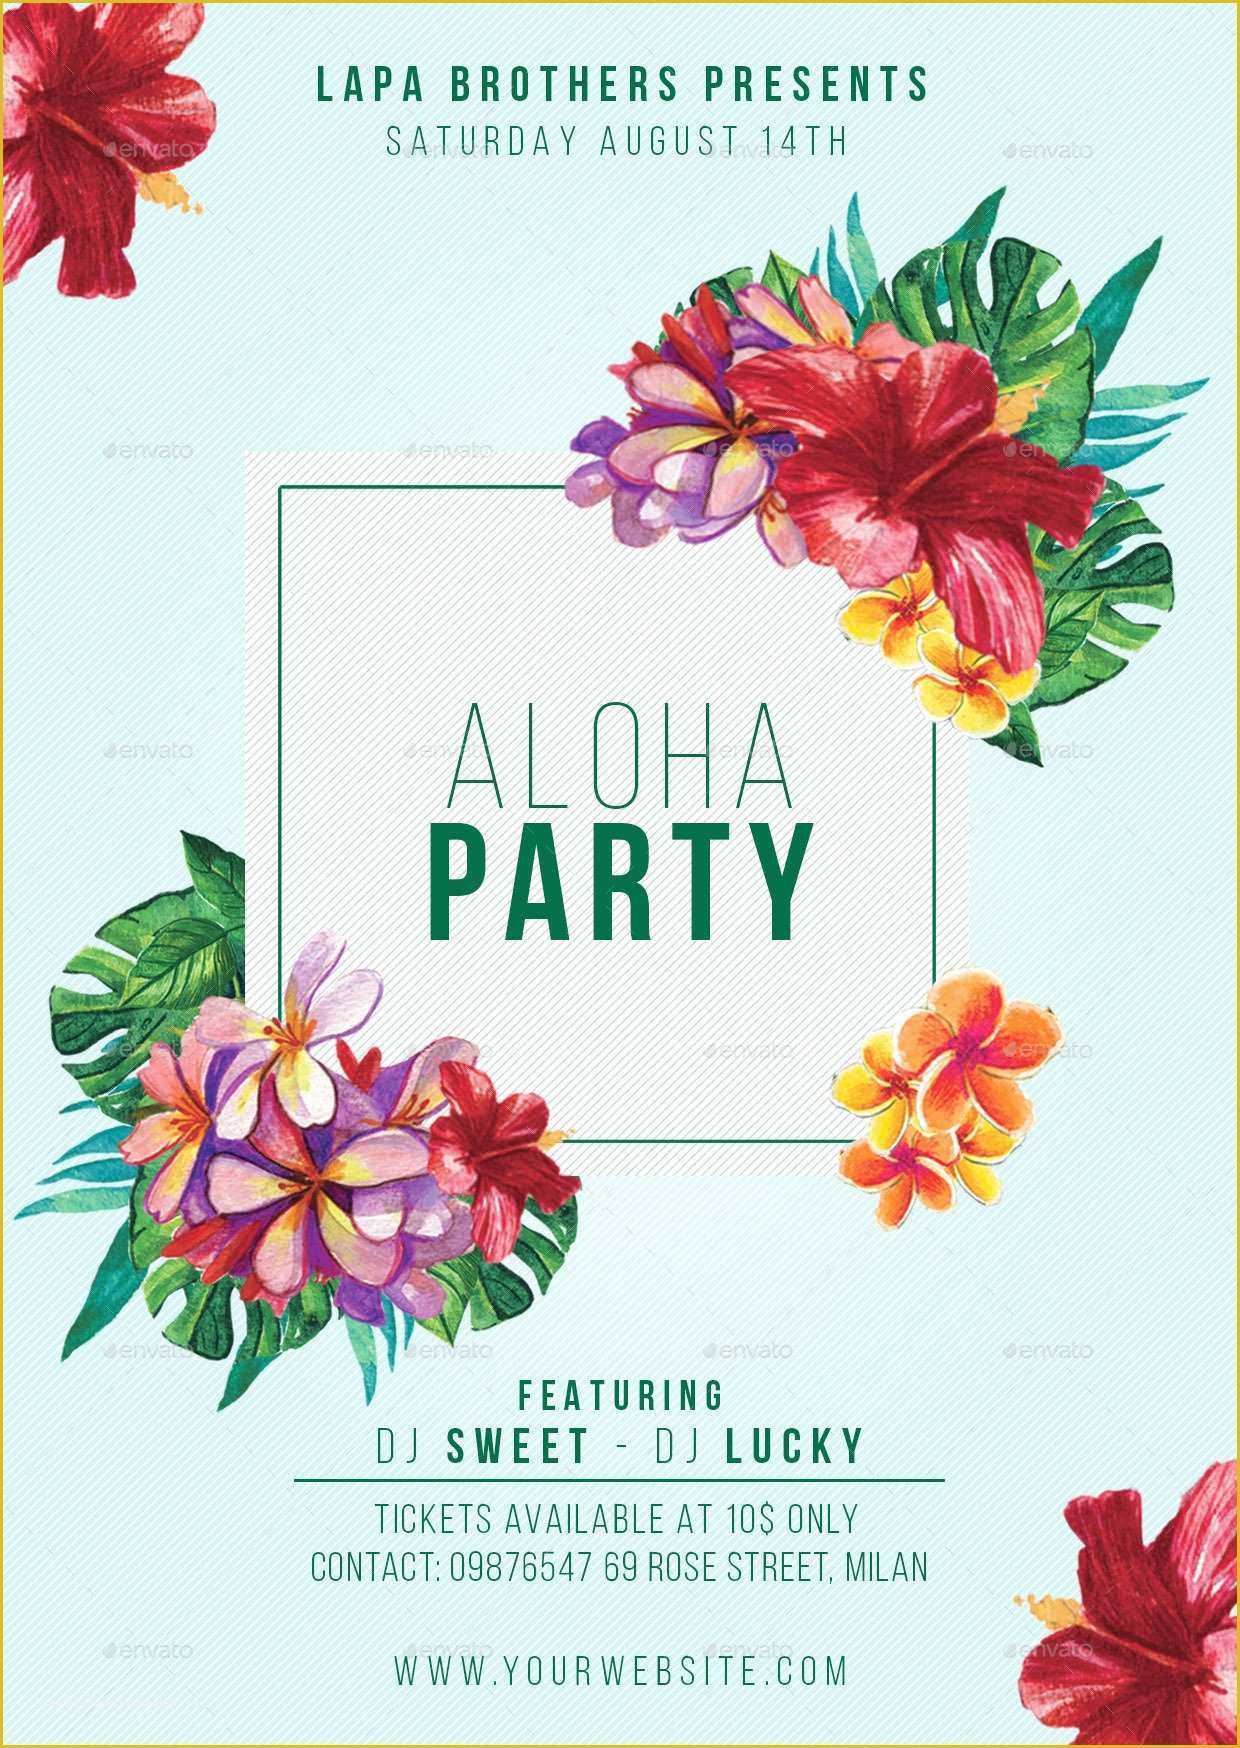 Free Hawaiian Luau Flyer Template Of Aloha Party Flyer Template by Lapabrothers